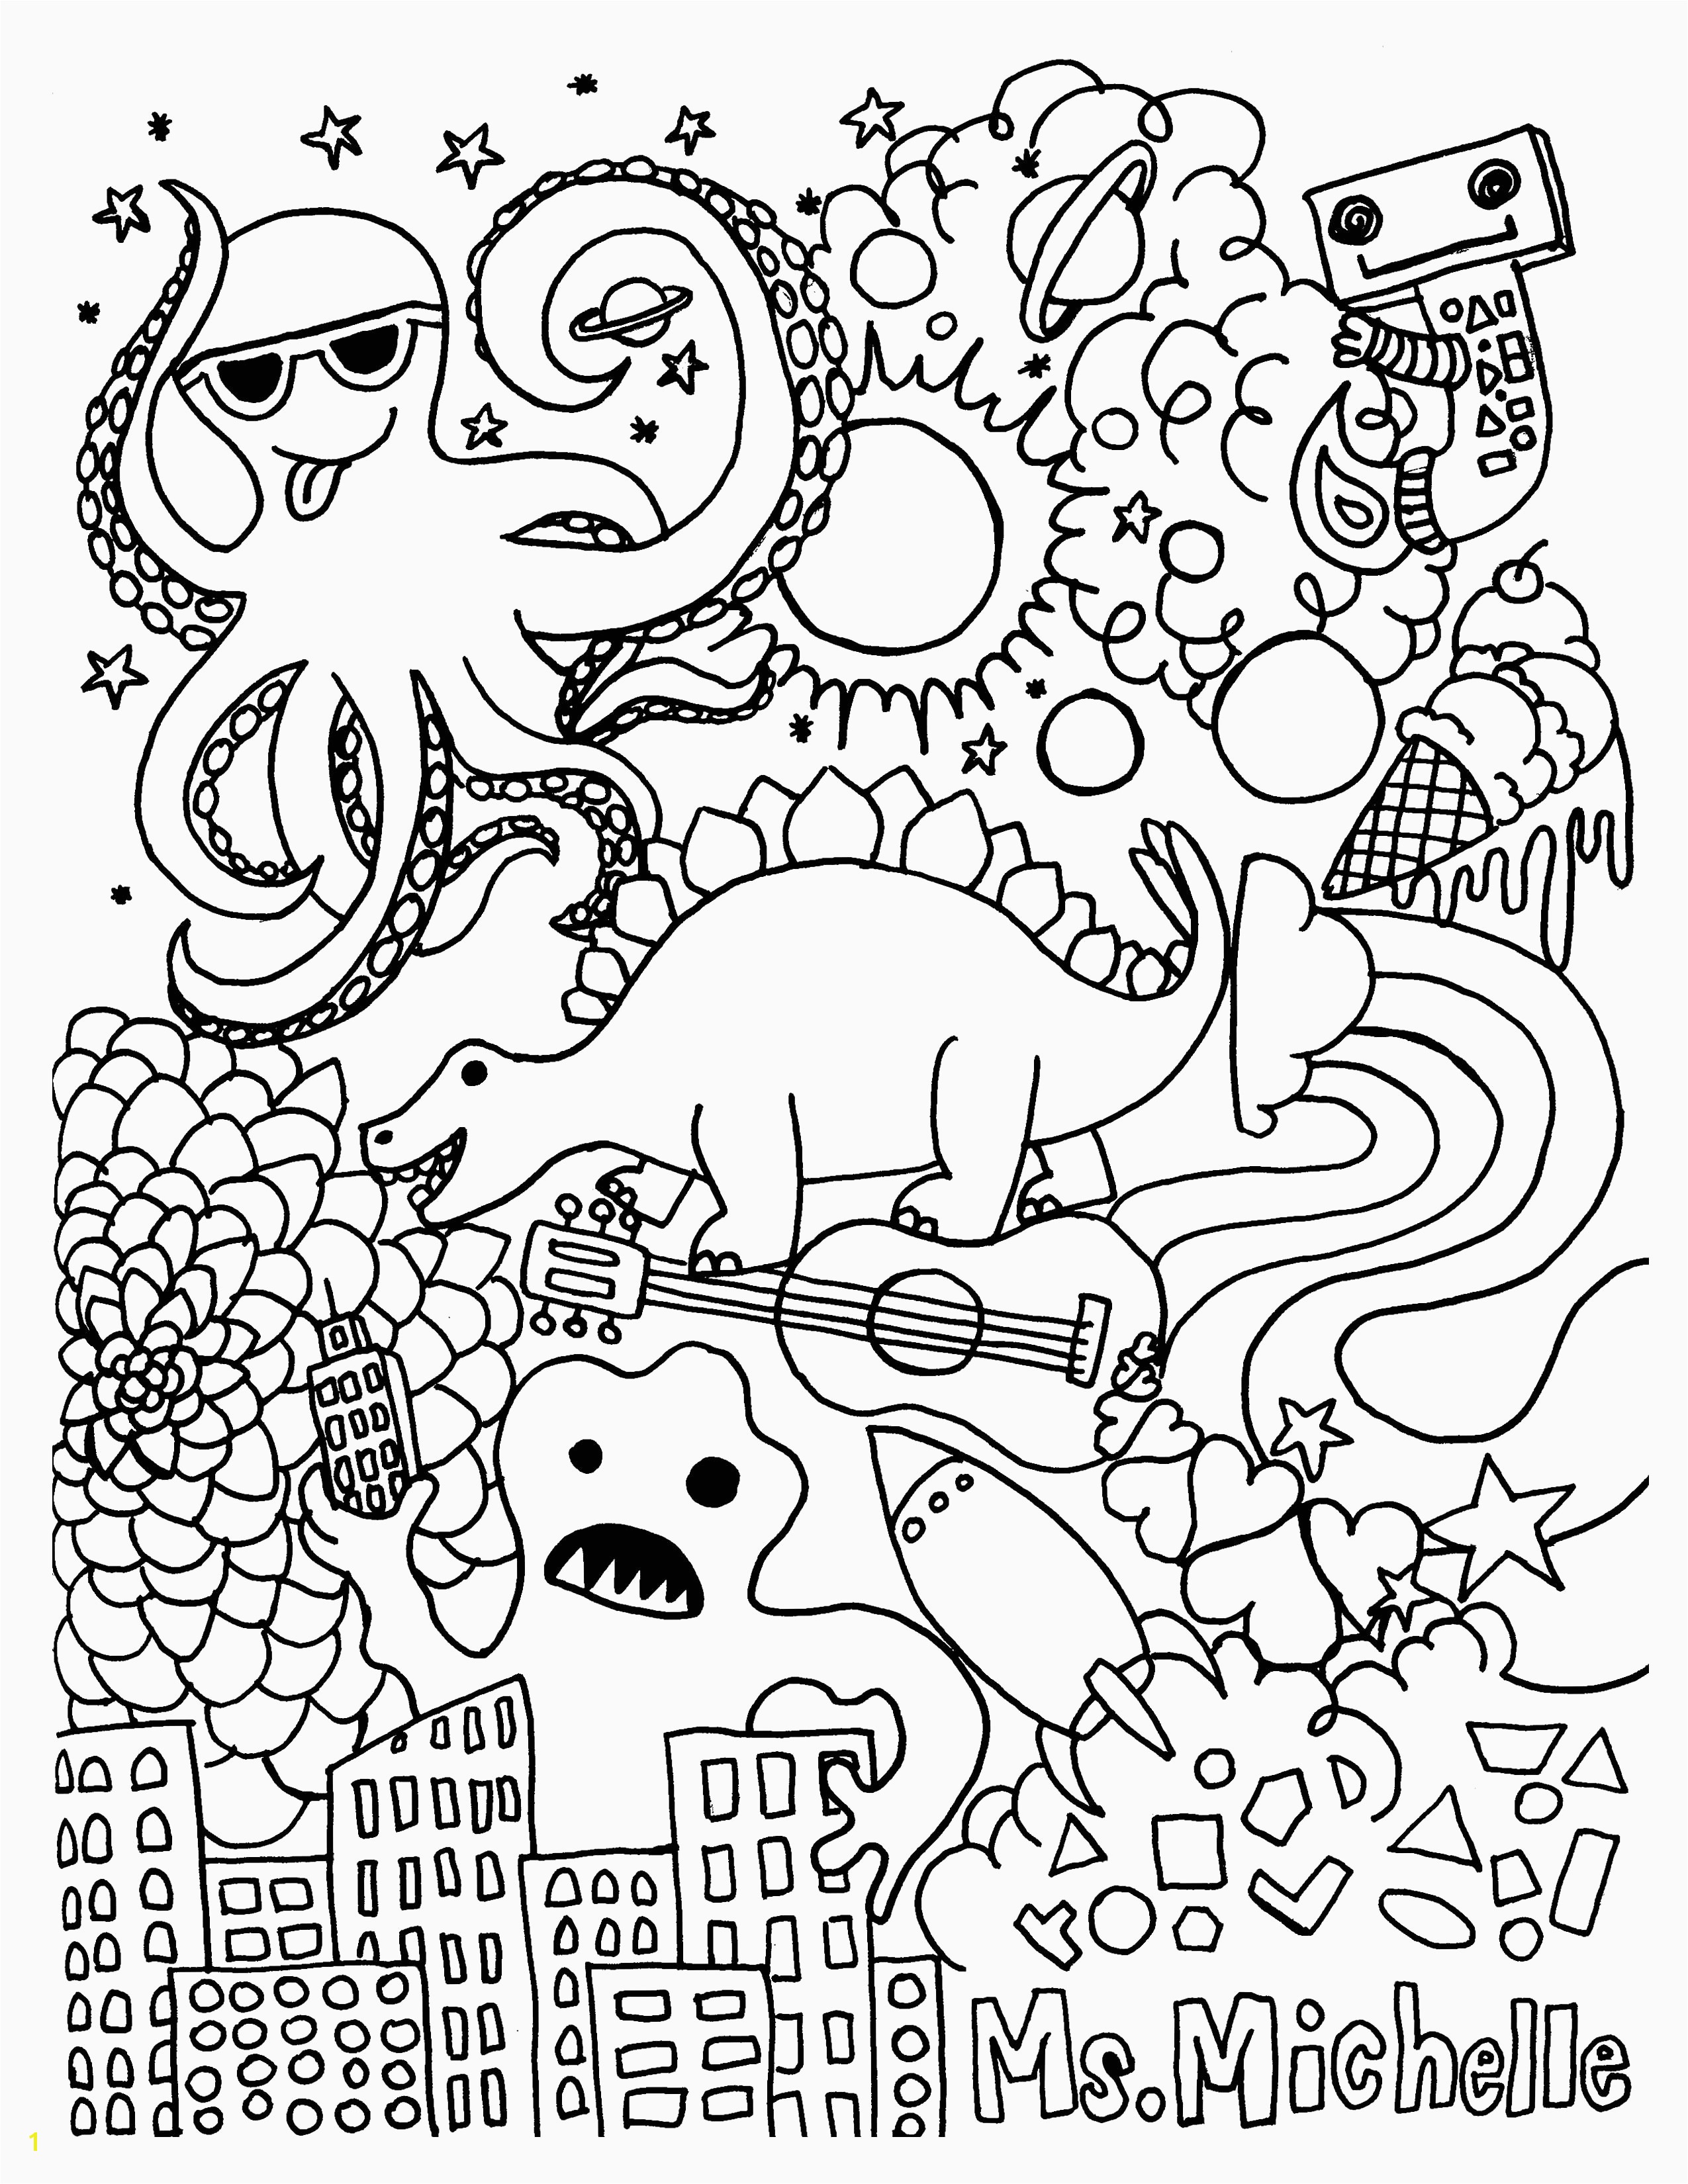 Color Sheets for Kids Inspirational Cool Coloring Page Unique Witch Coloring Pages New Crayola Pages 0d